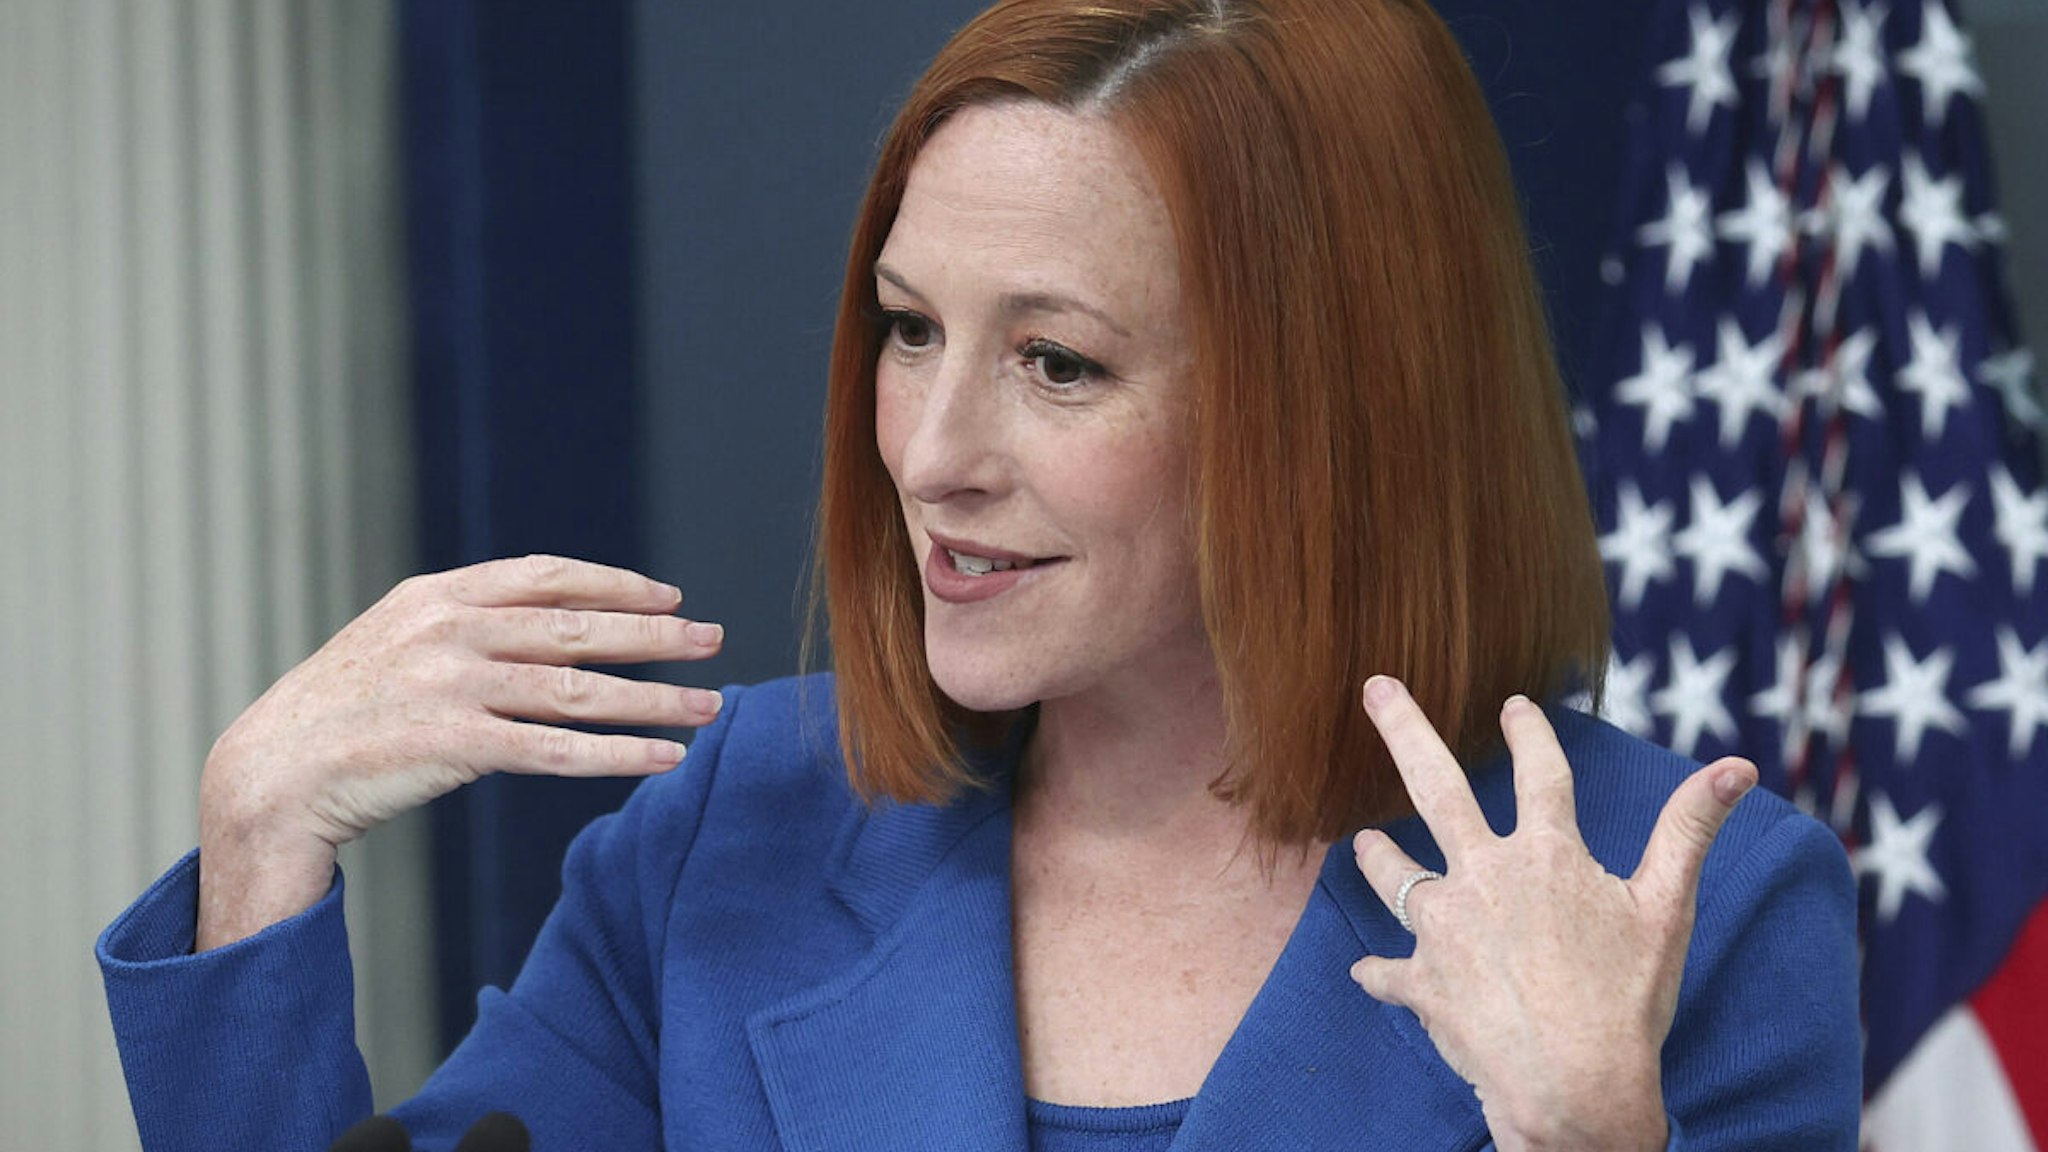 White House press secretary Jen Psaki answers questions during the daily briefing April 20, 2022 in Washington, DC